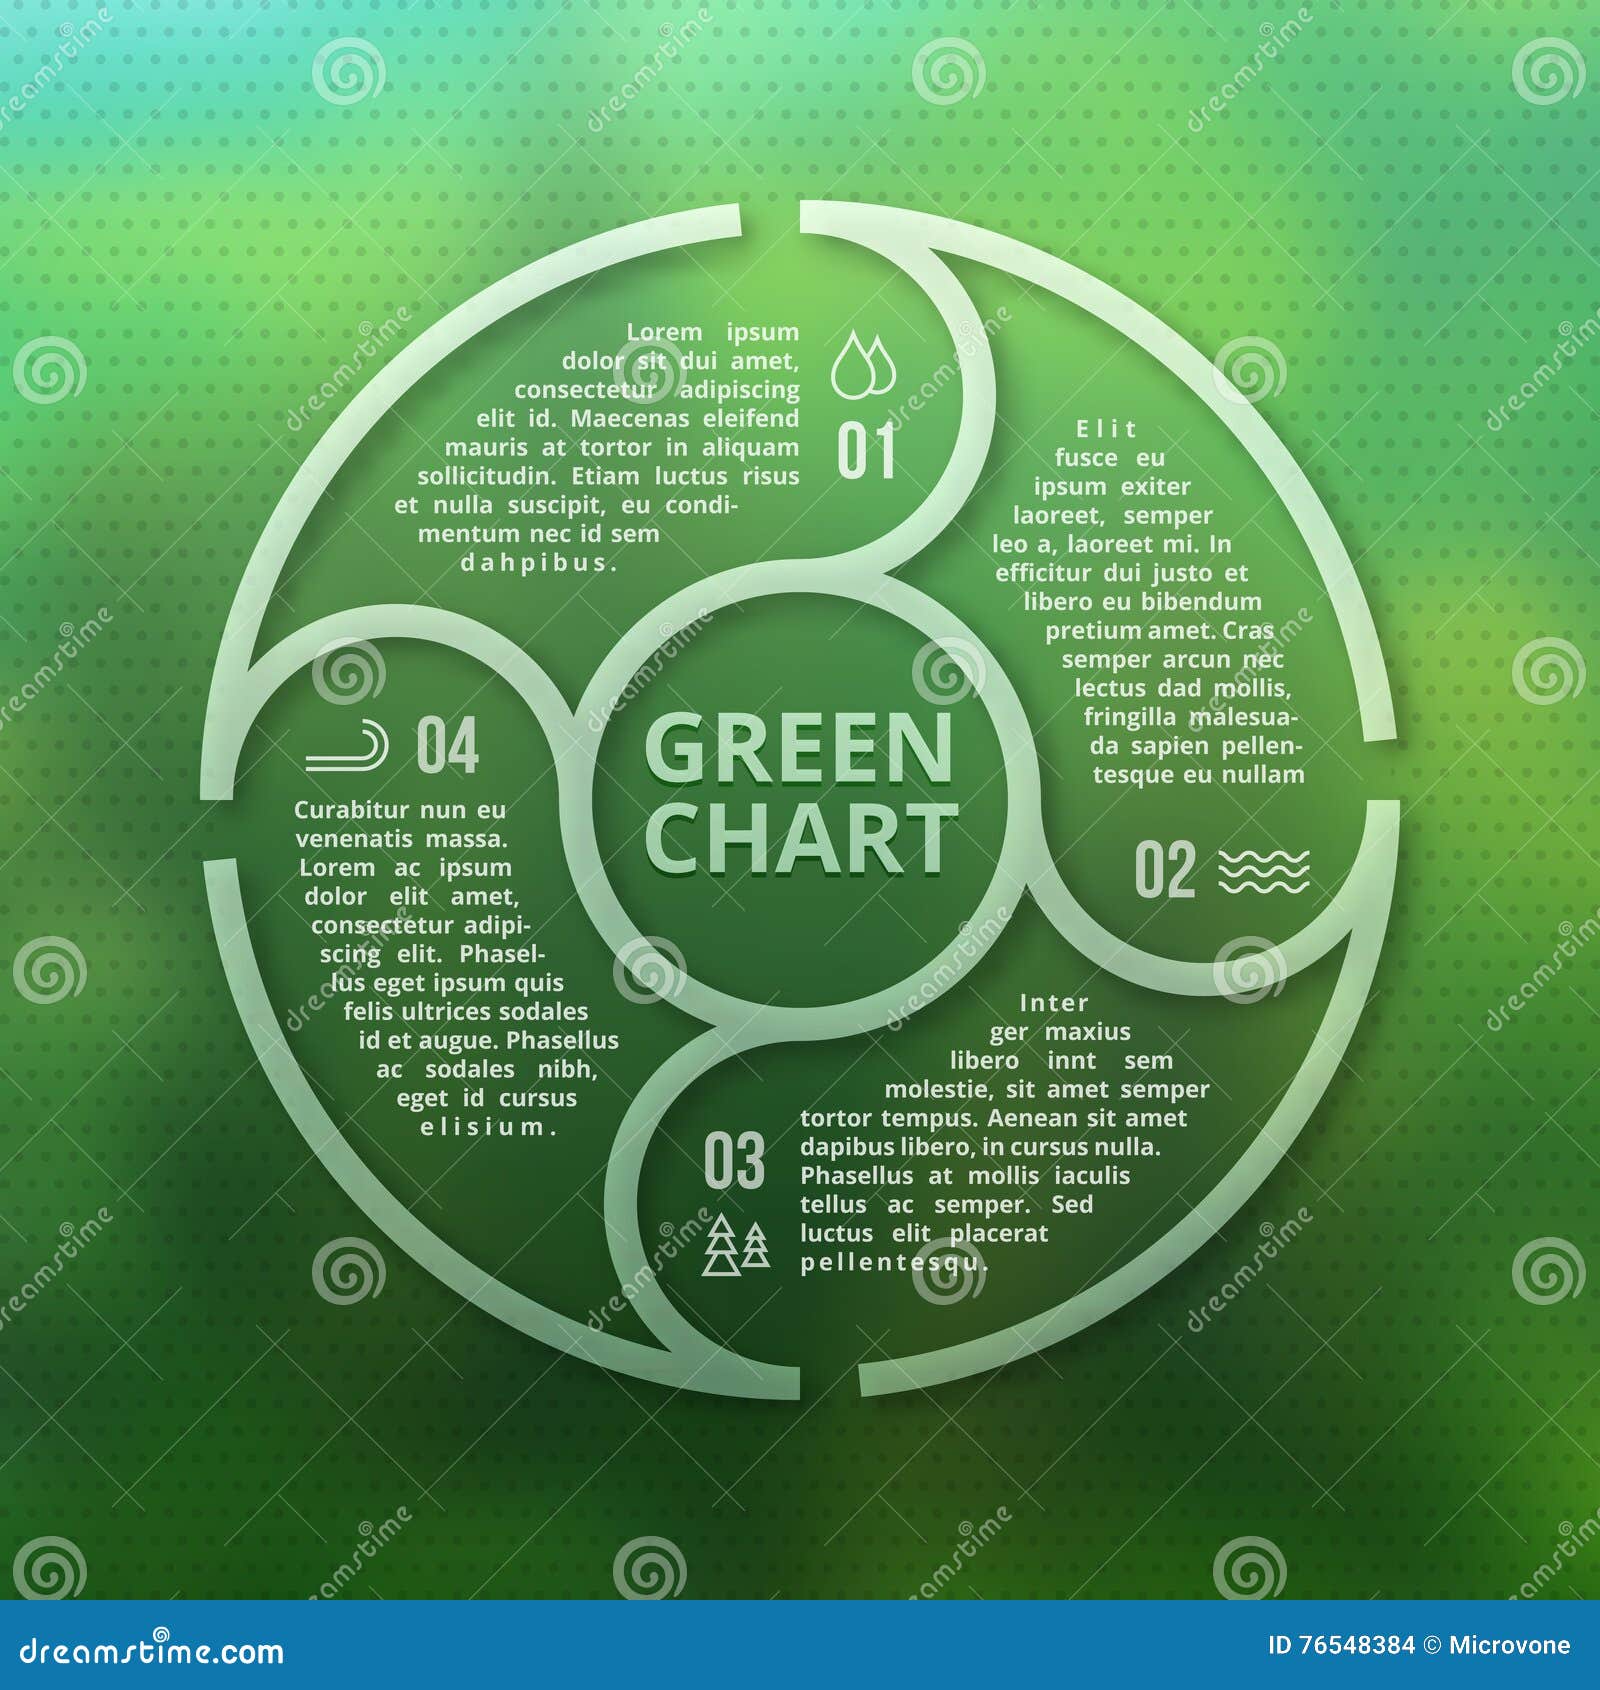 green forest eco infographic on unfocused blurred smooth creative background